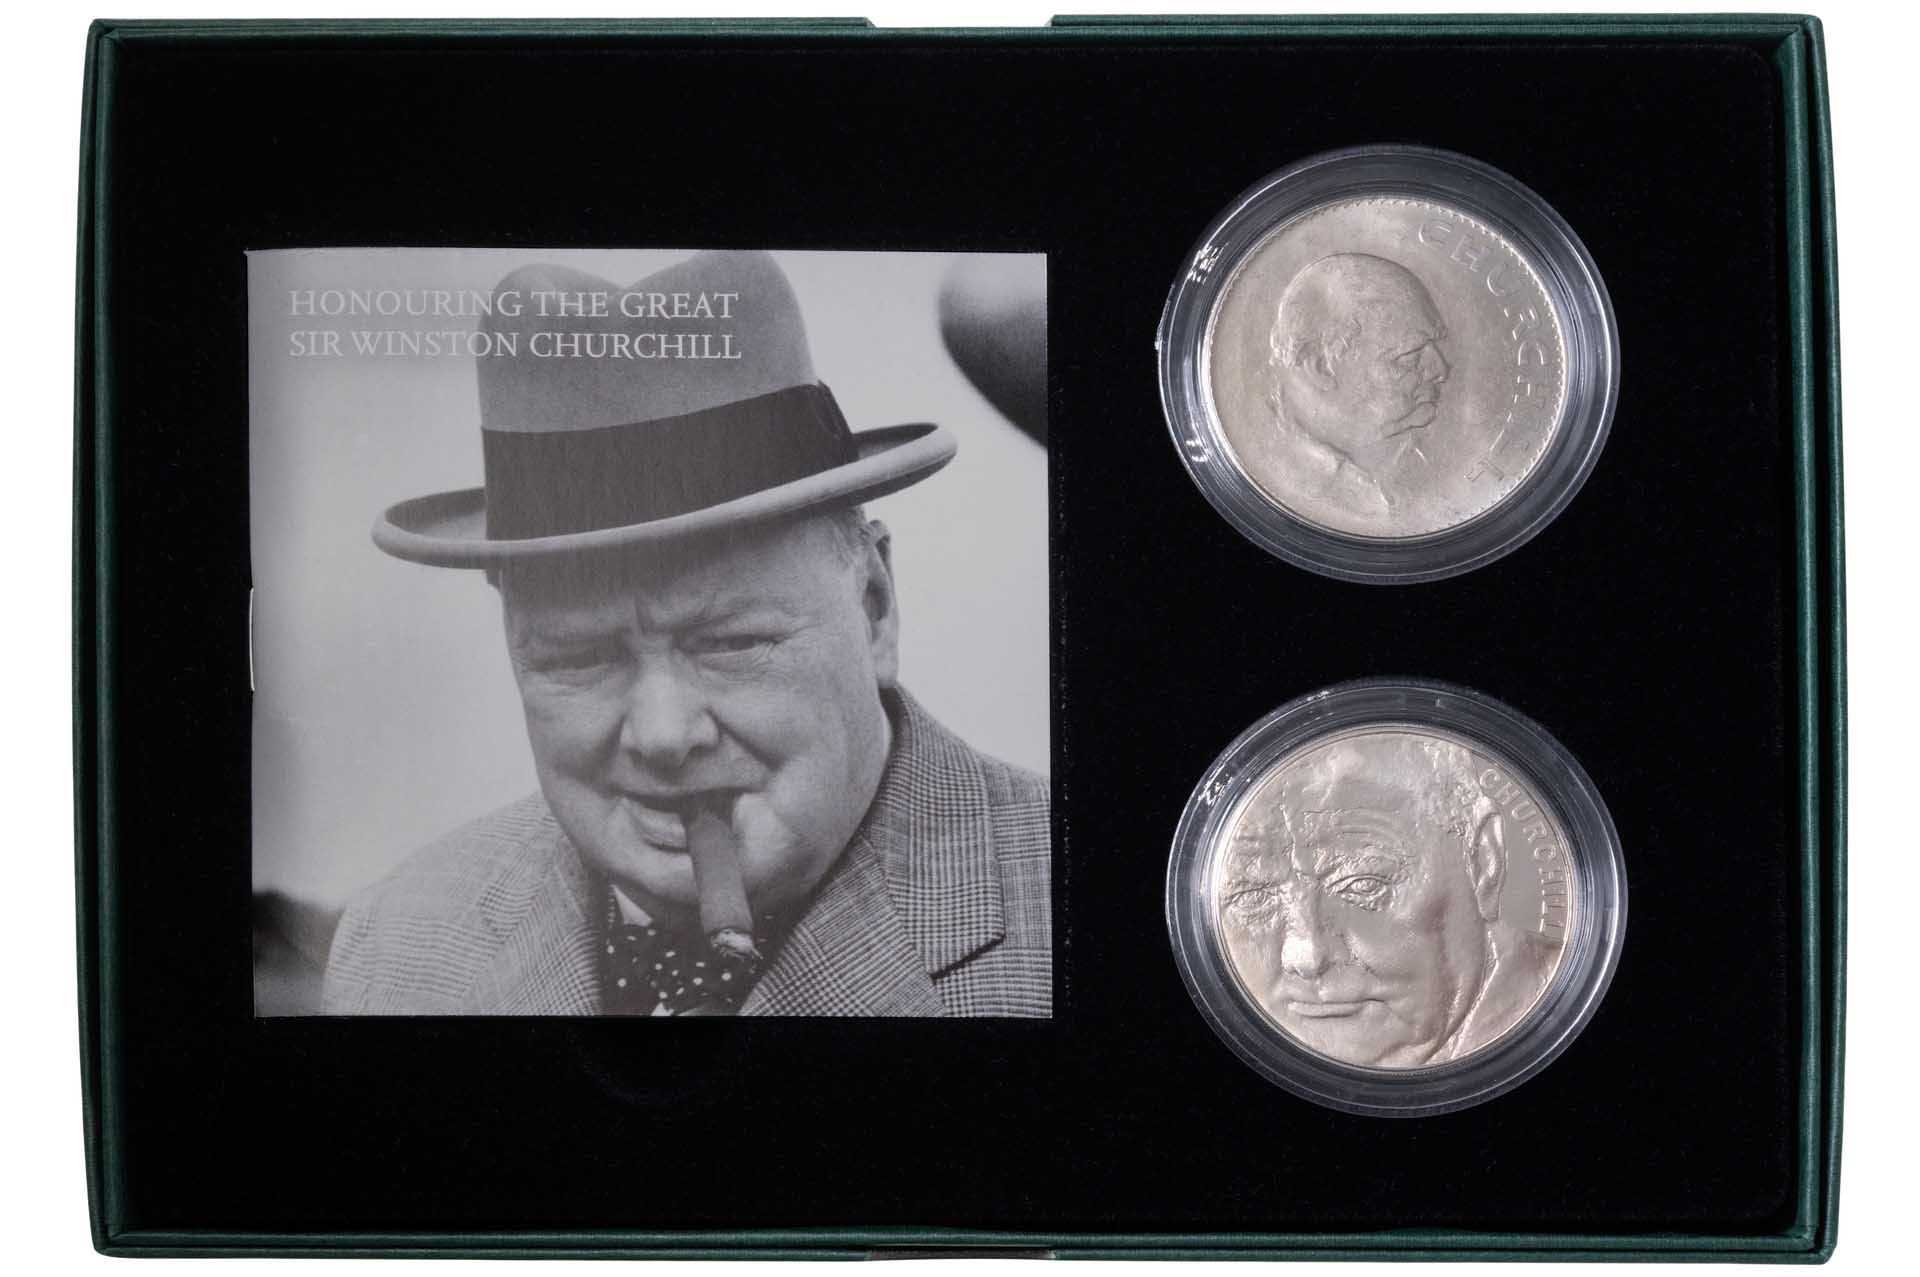 This 2015 Royal Mint set features a new brilliant uncirculated Five Pound coin (bottom) alongside a 1965 Churchill Crown (top).